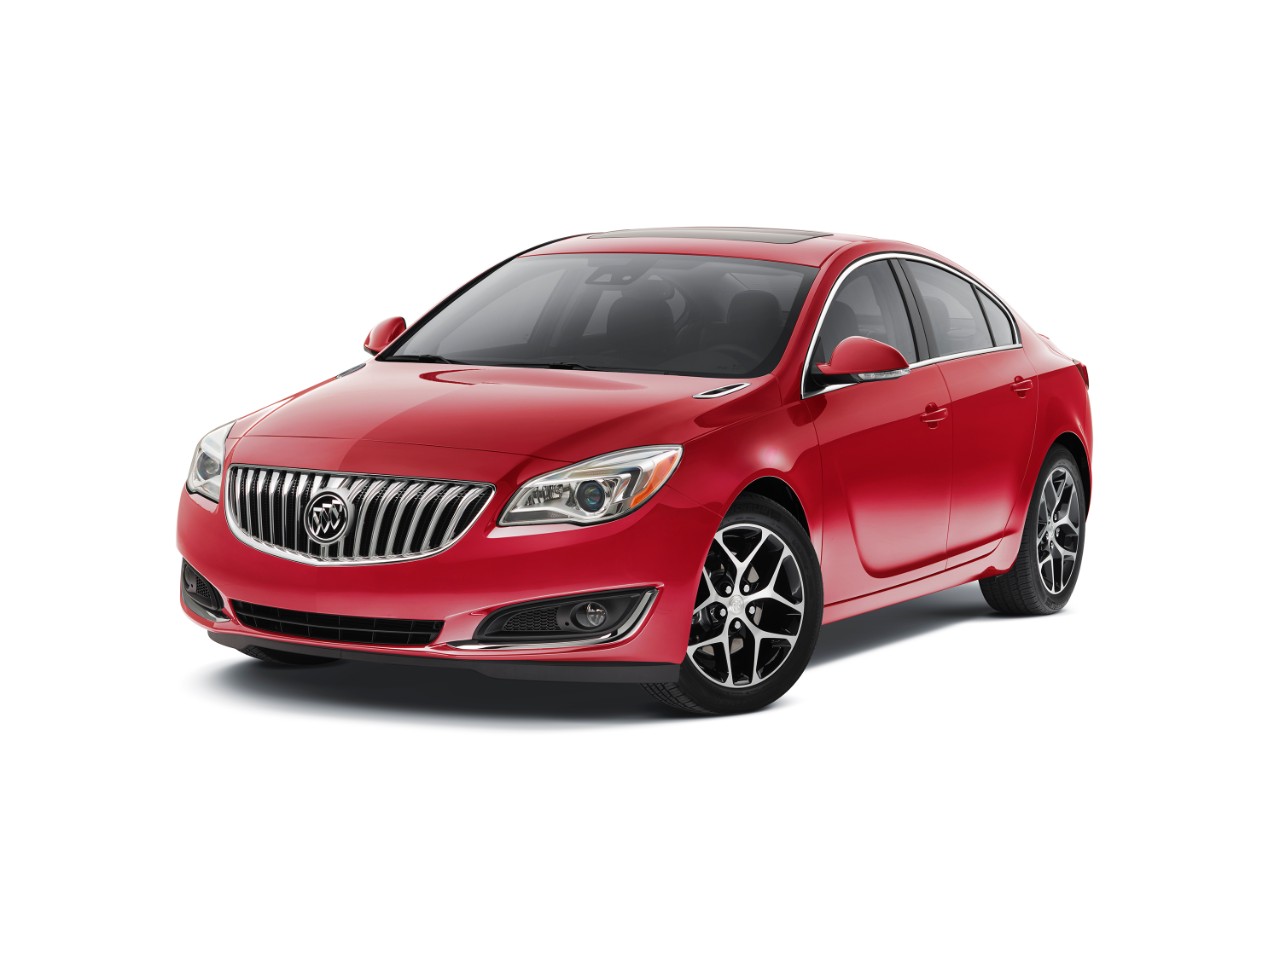 2016 Buick Regal Overview The News Wheel